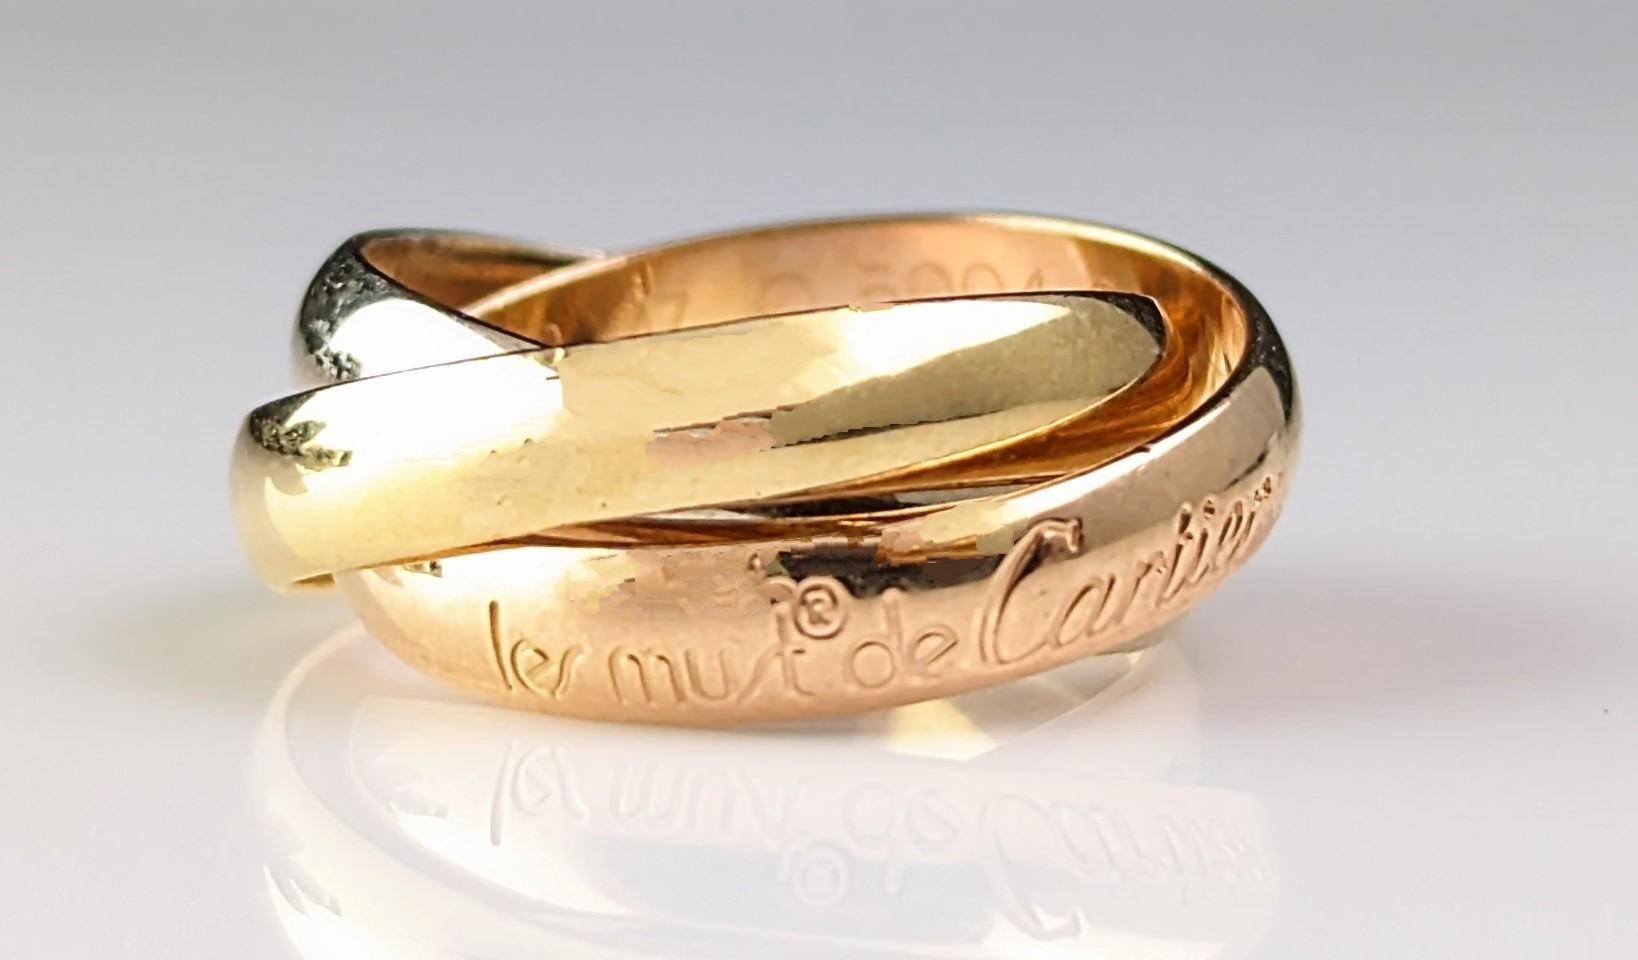 Vintage Les Must de Cartier Trinity Ring, 18k Gold, Boxed  im Angebot 3